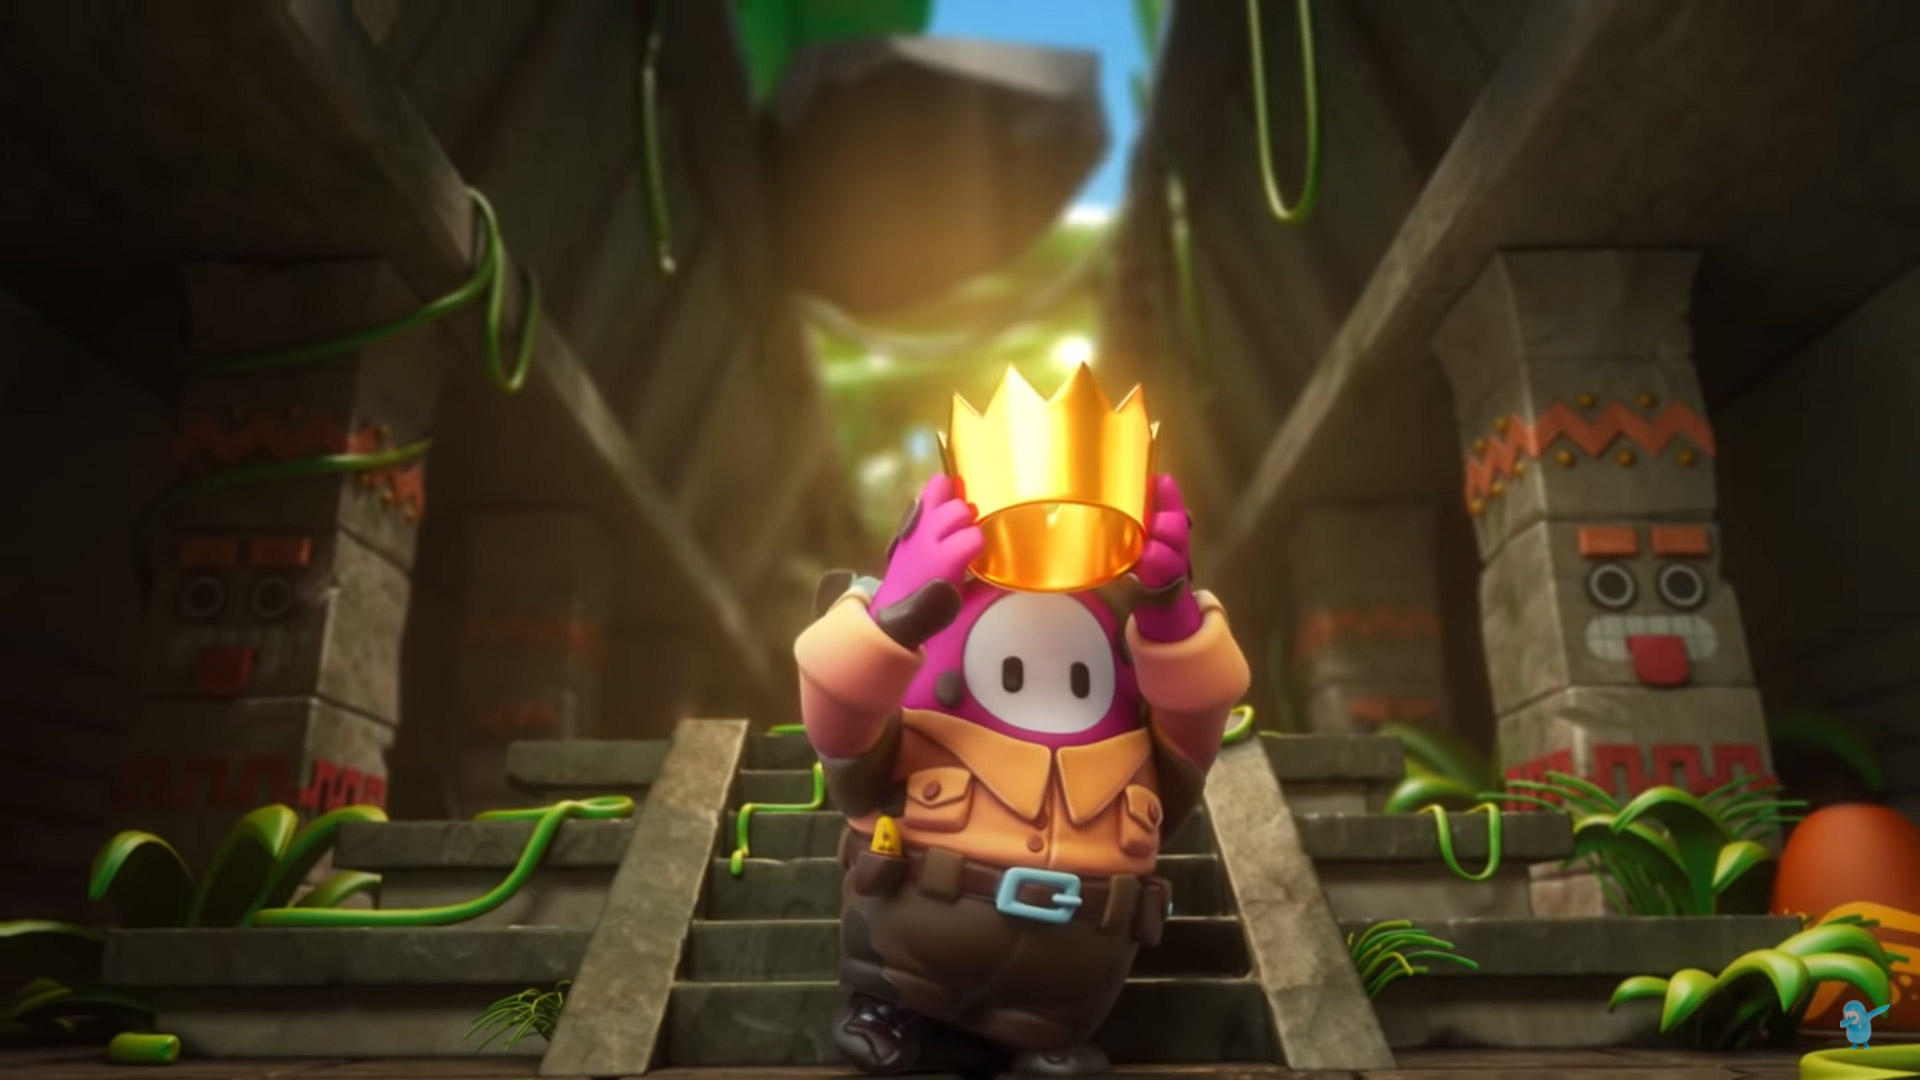 Fall Guys Season 5 release imminent, adds jungle romps and tomb raiding